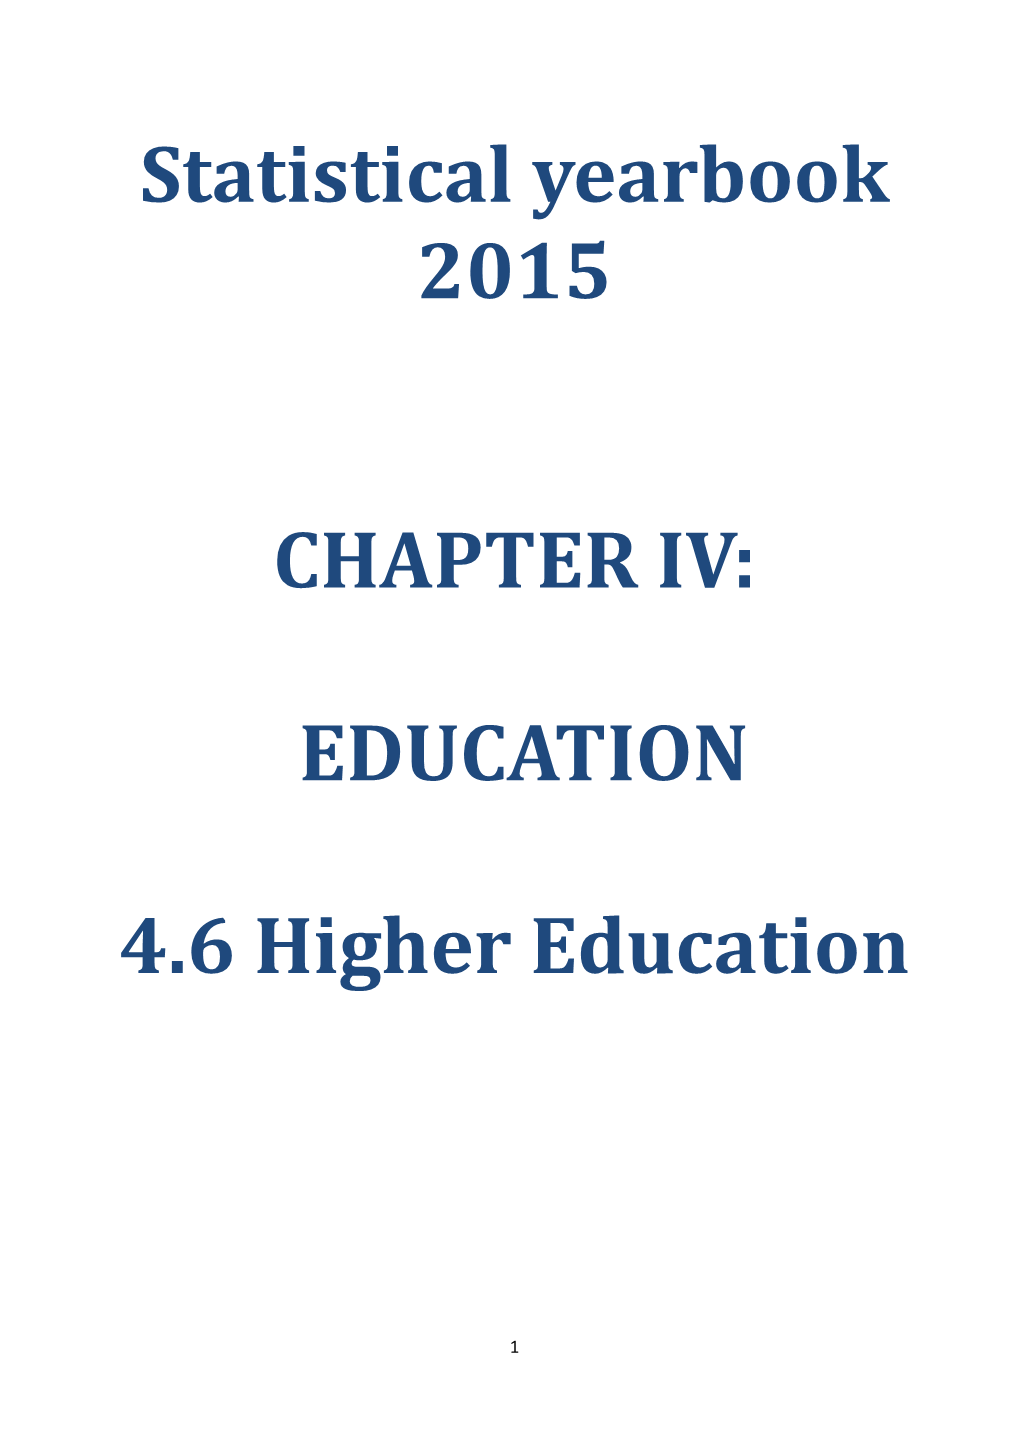 Statistical Yearbook 2015 CHAPTER IV: EDUCATION 4.6 Higher Education